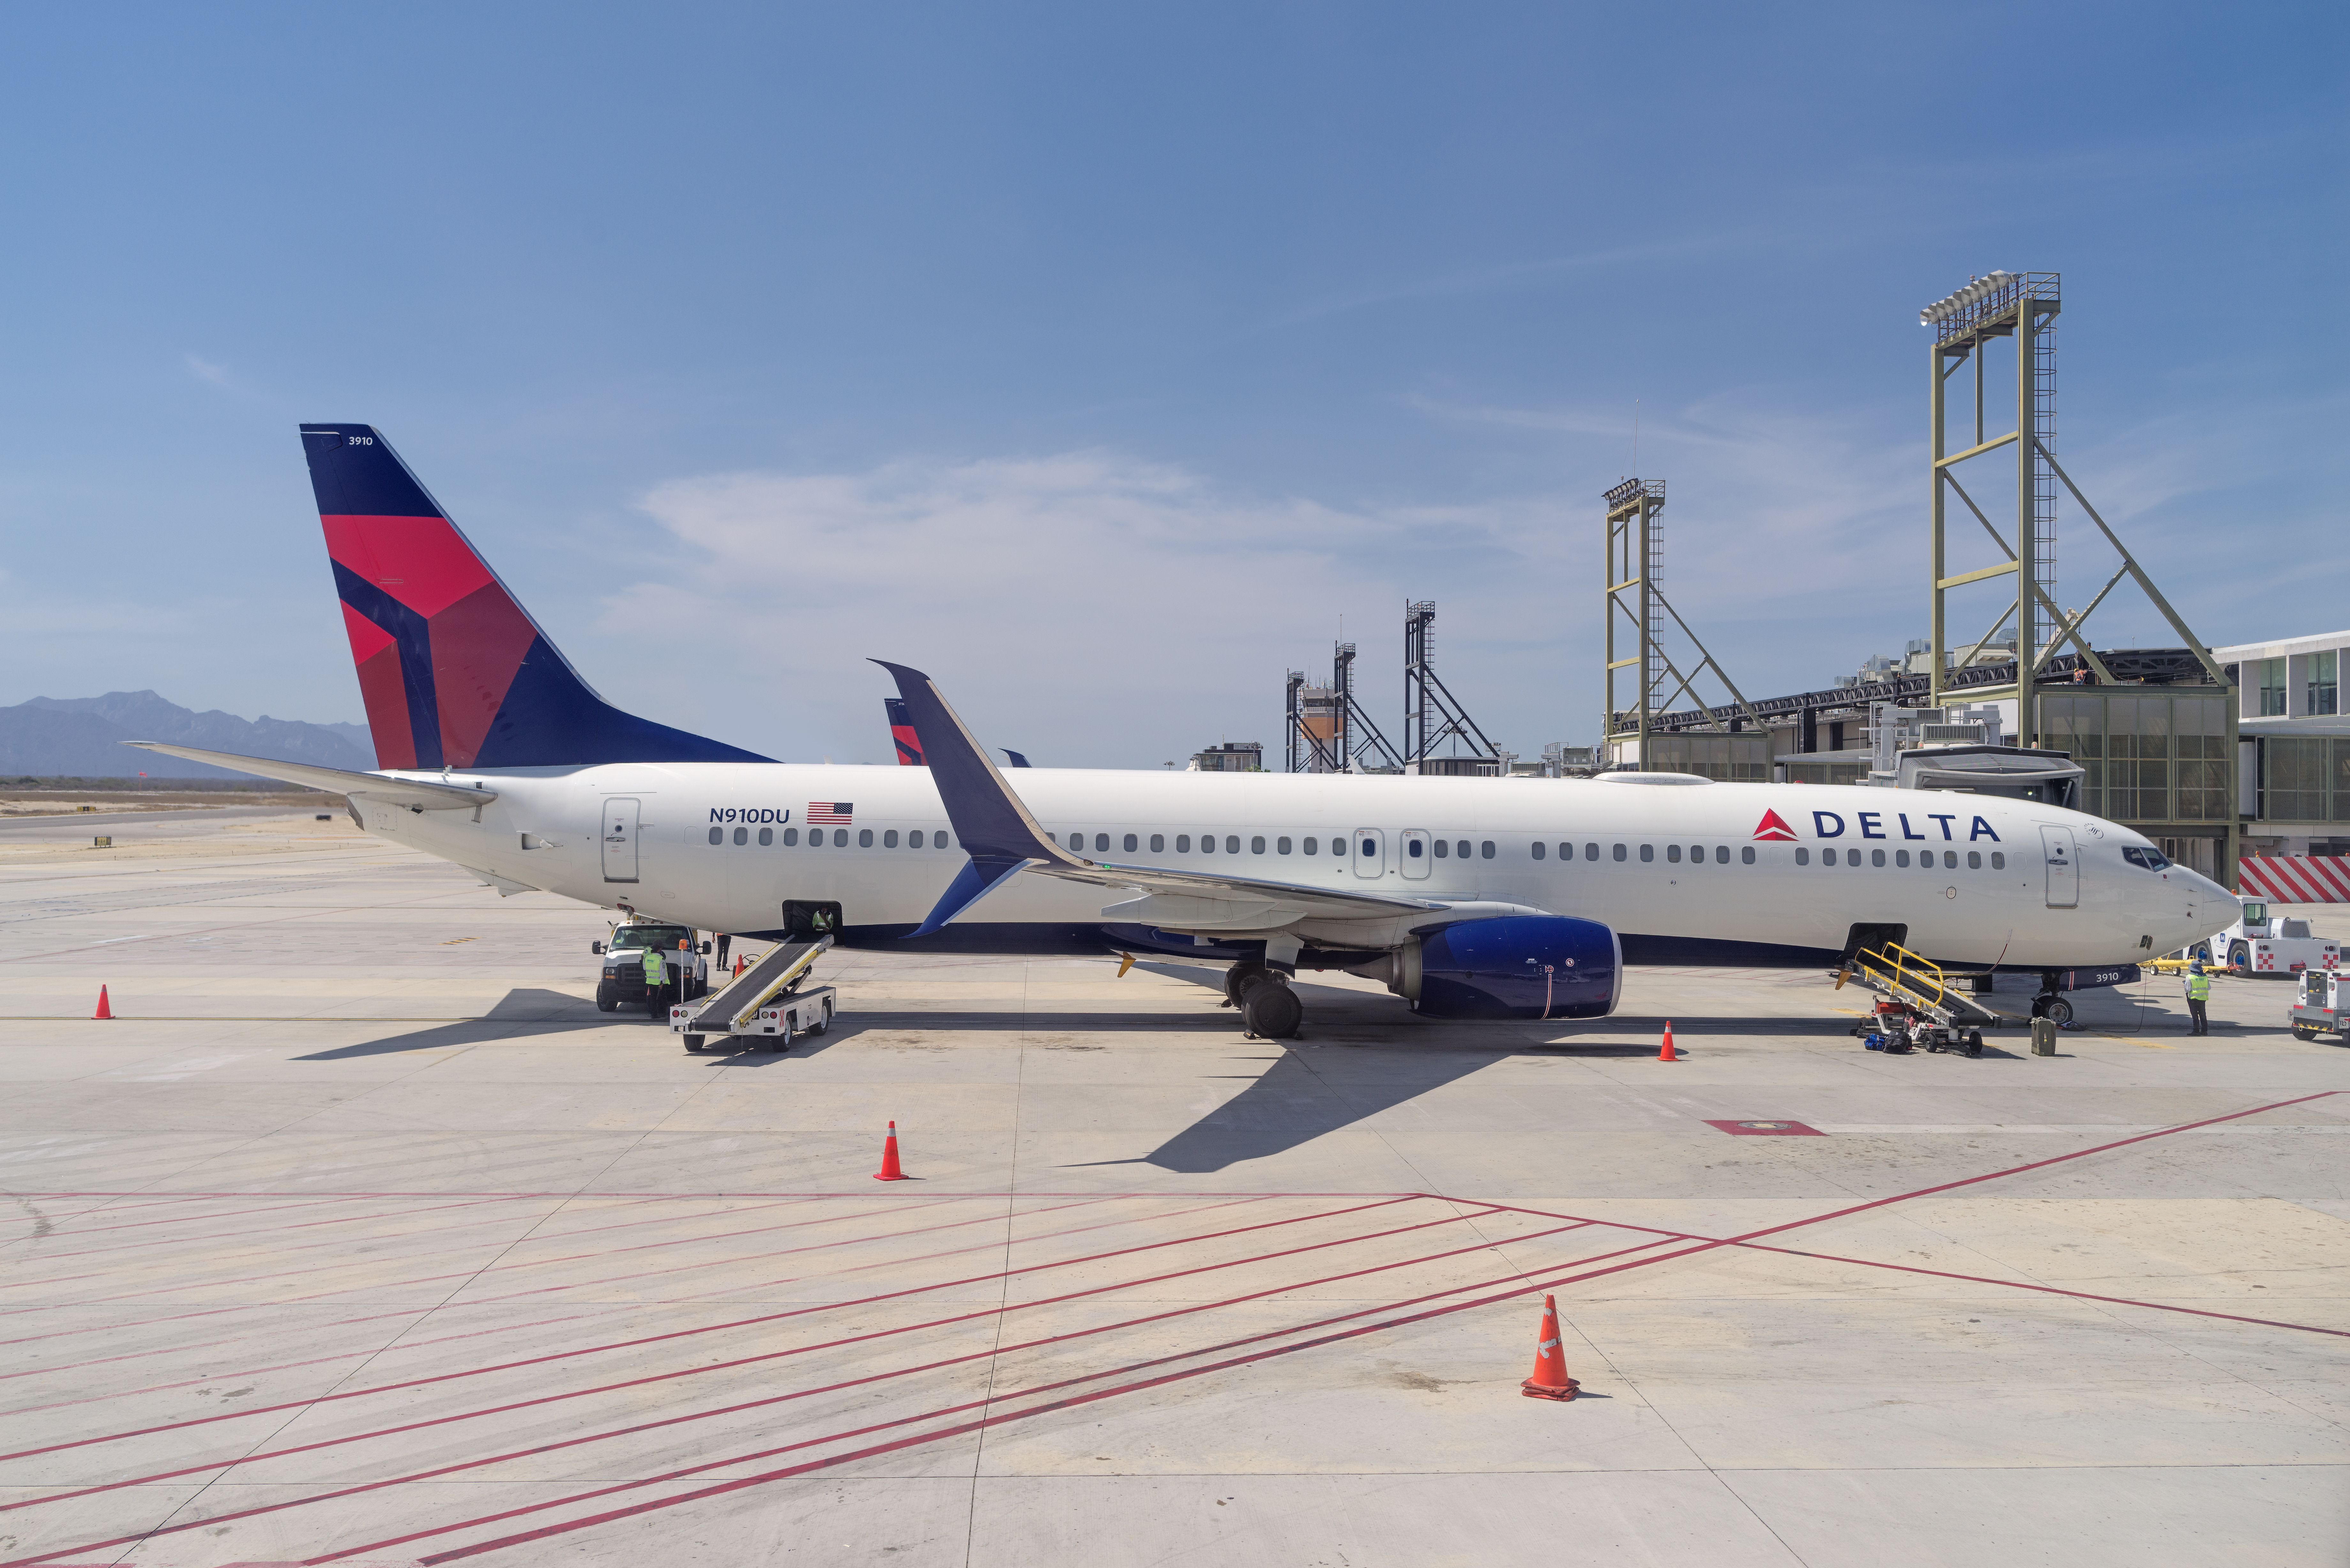 A Delta Air Lines Boeing 737-900ER parked at an airport